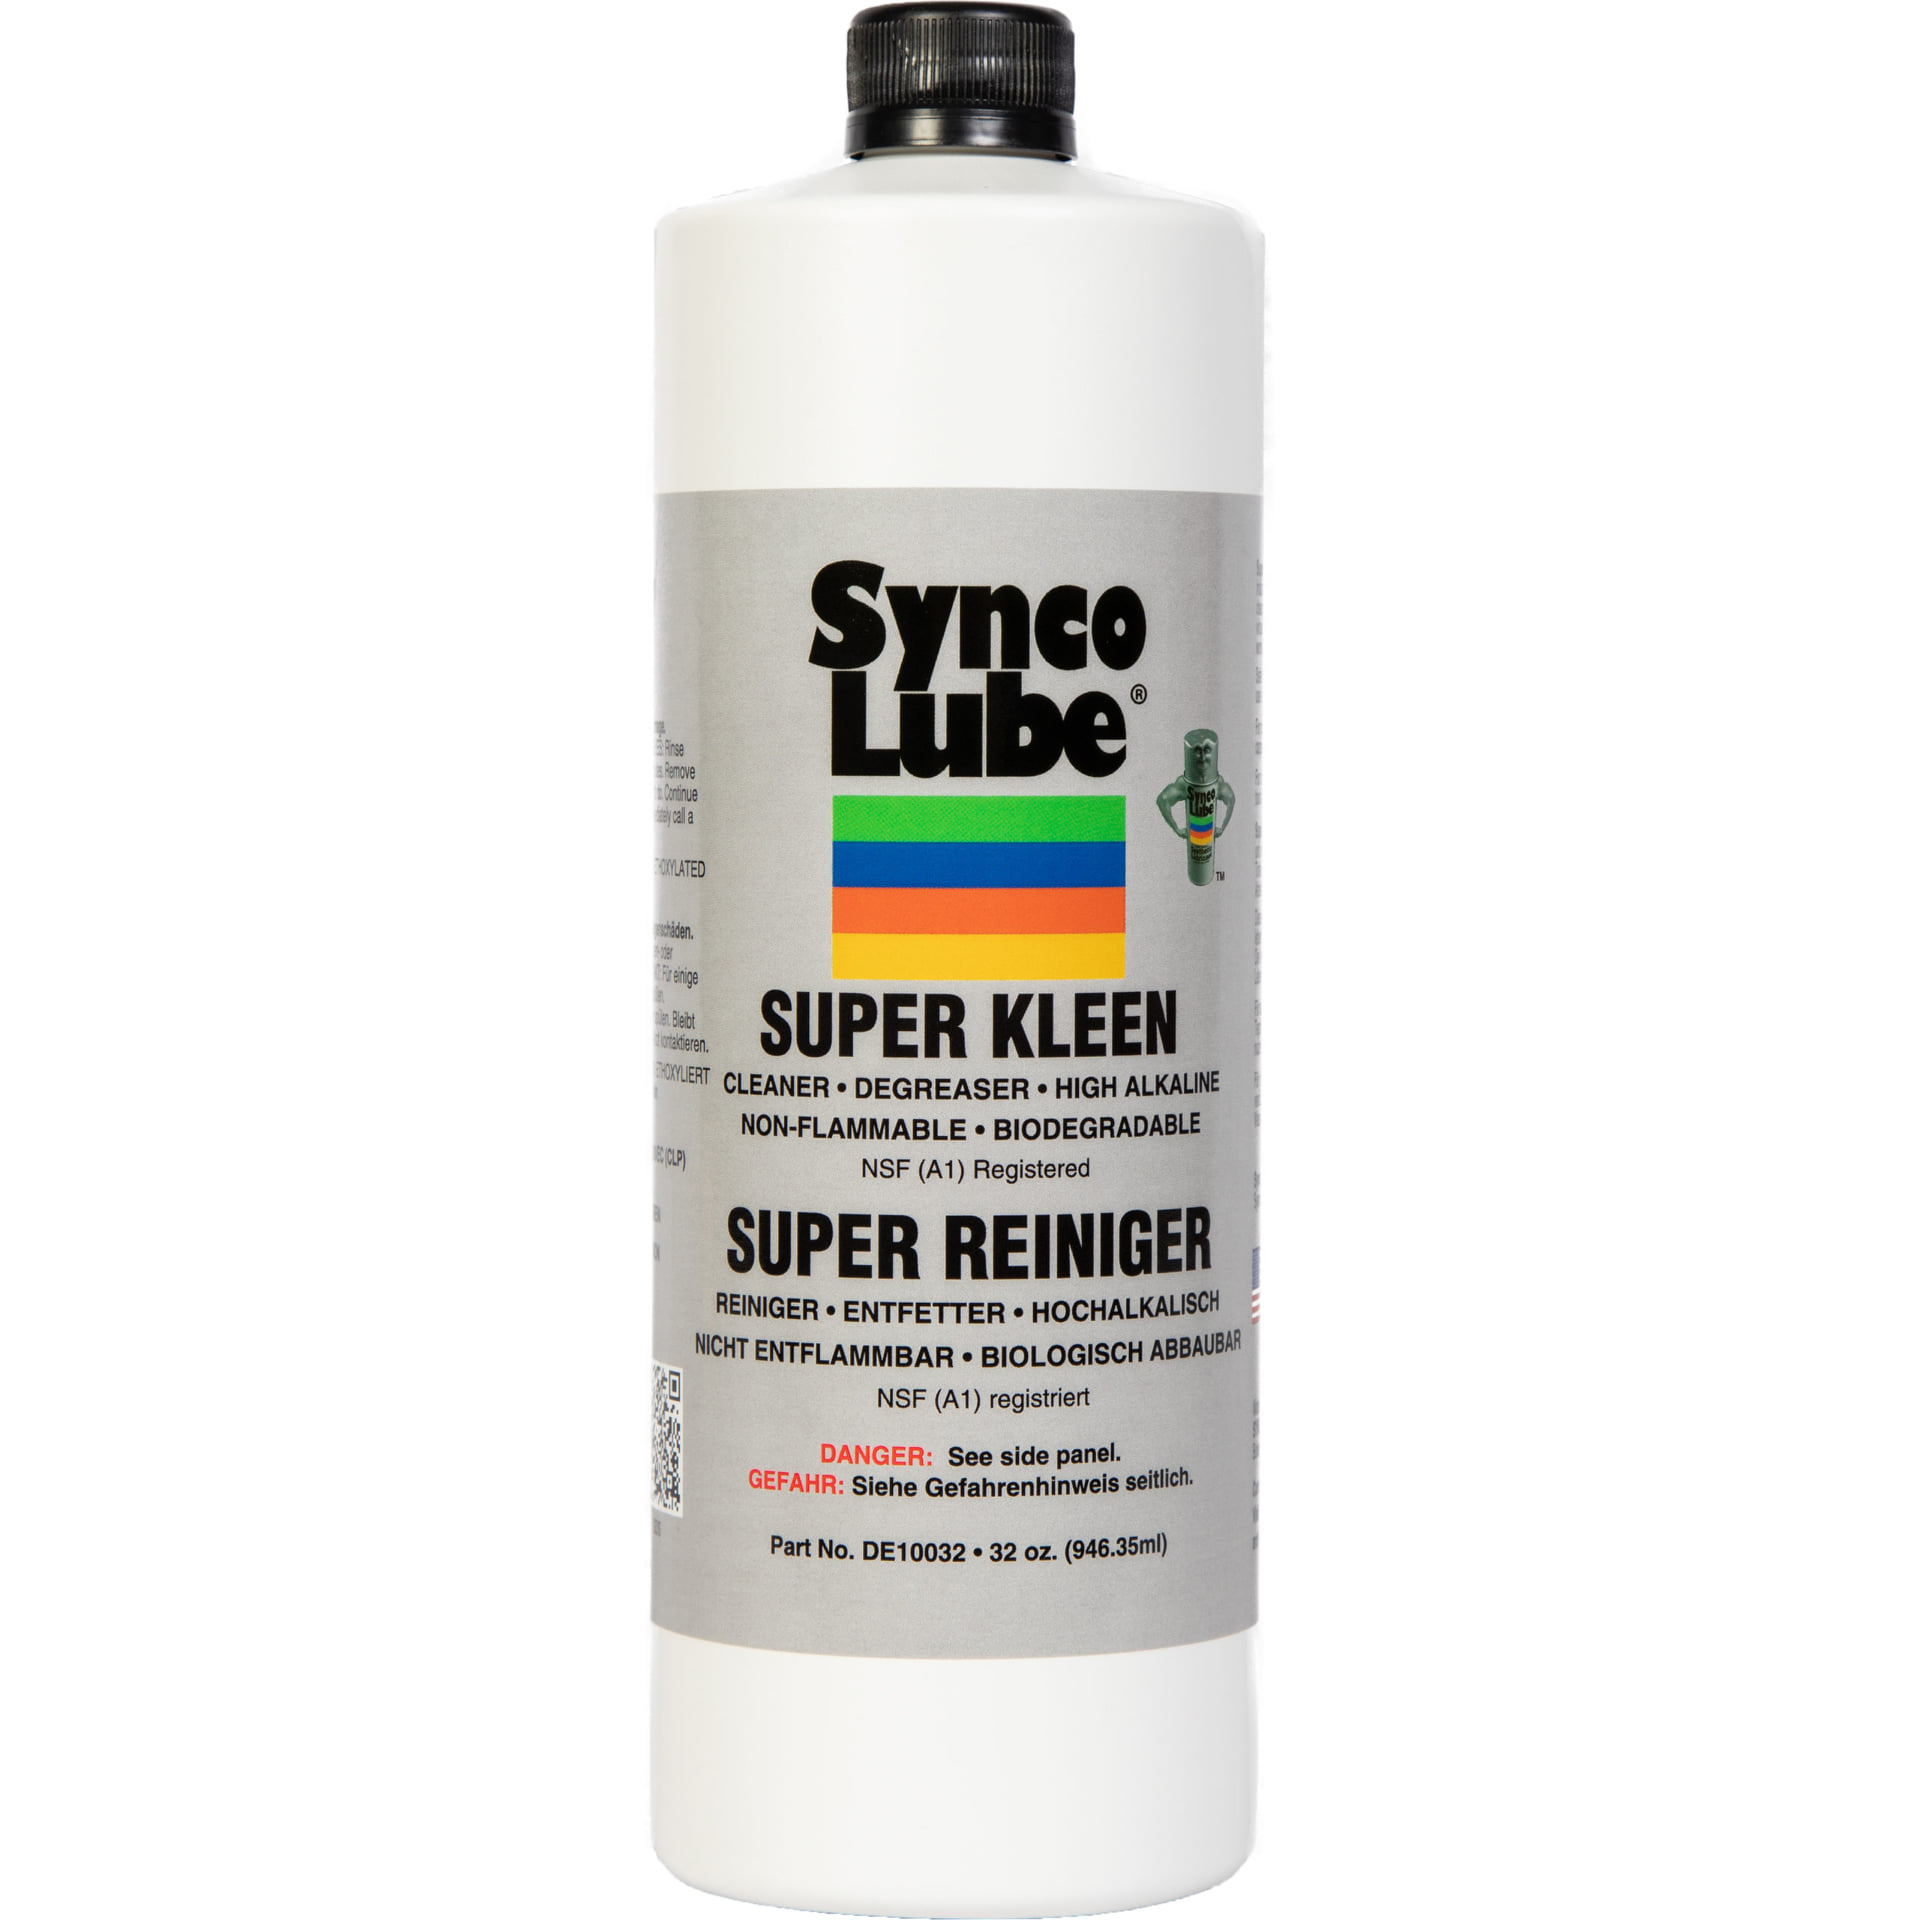 Dung dịch Super Lube® Super Kleen Cleaner/Degreaser